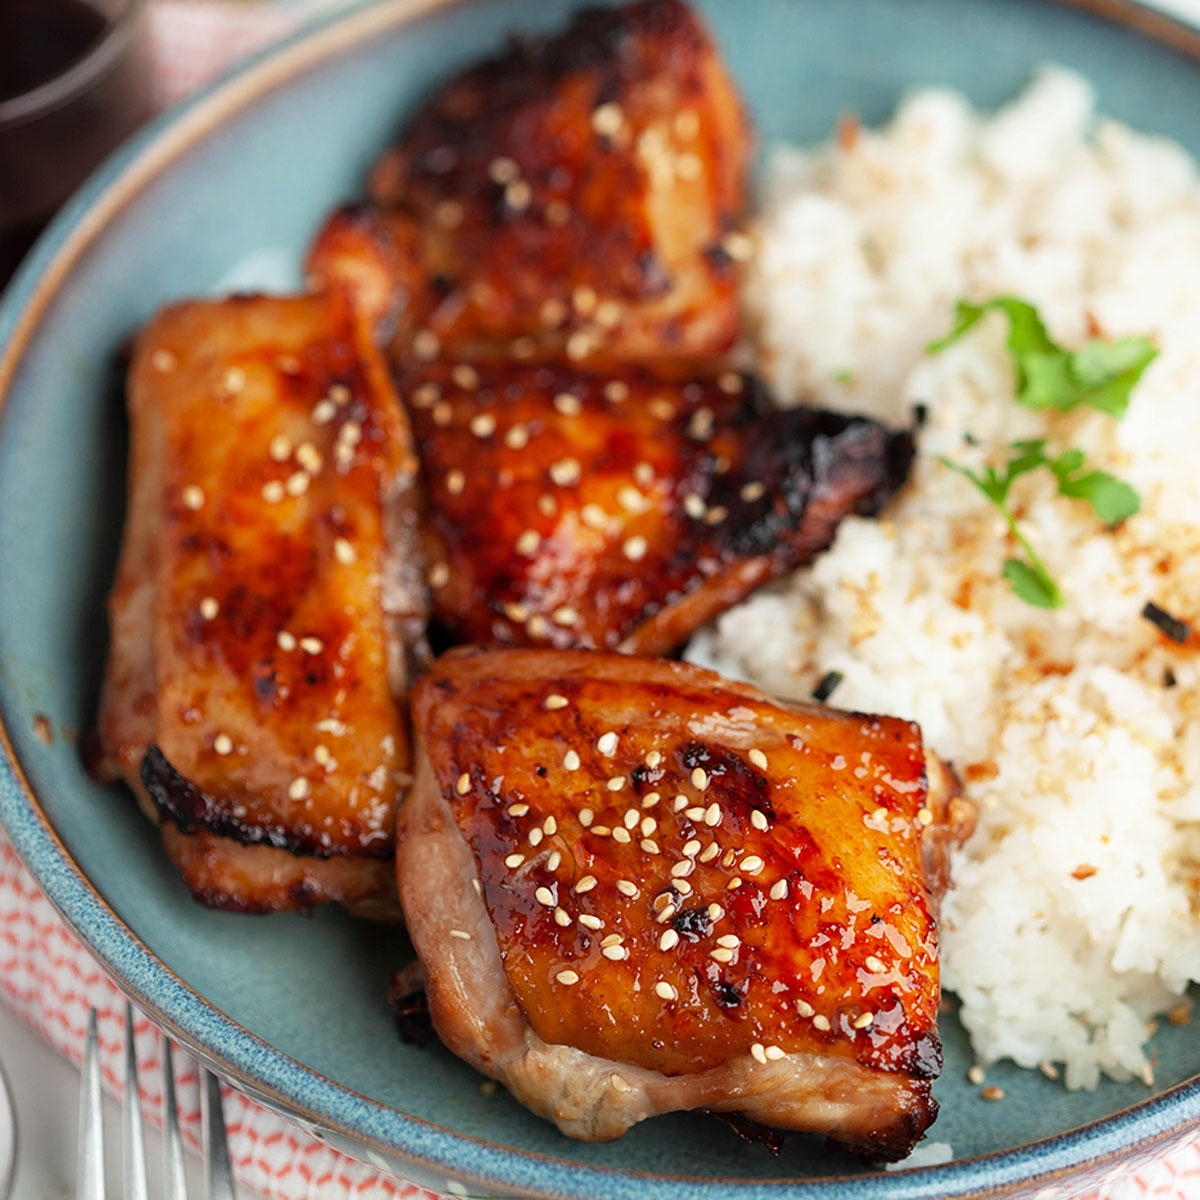 Air Fryer Teriyaki chicken is one of my all-time favorite ways of cooking and eating chicken. I find that the best cuts to use are either chicken breasts or thighs that have been boned and skinned.